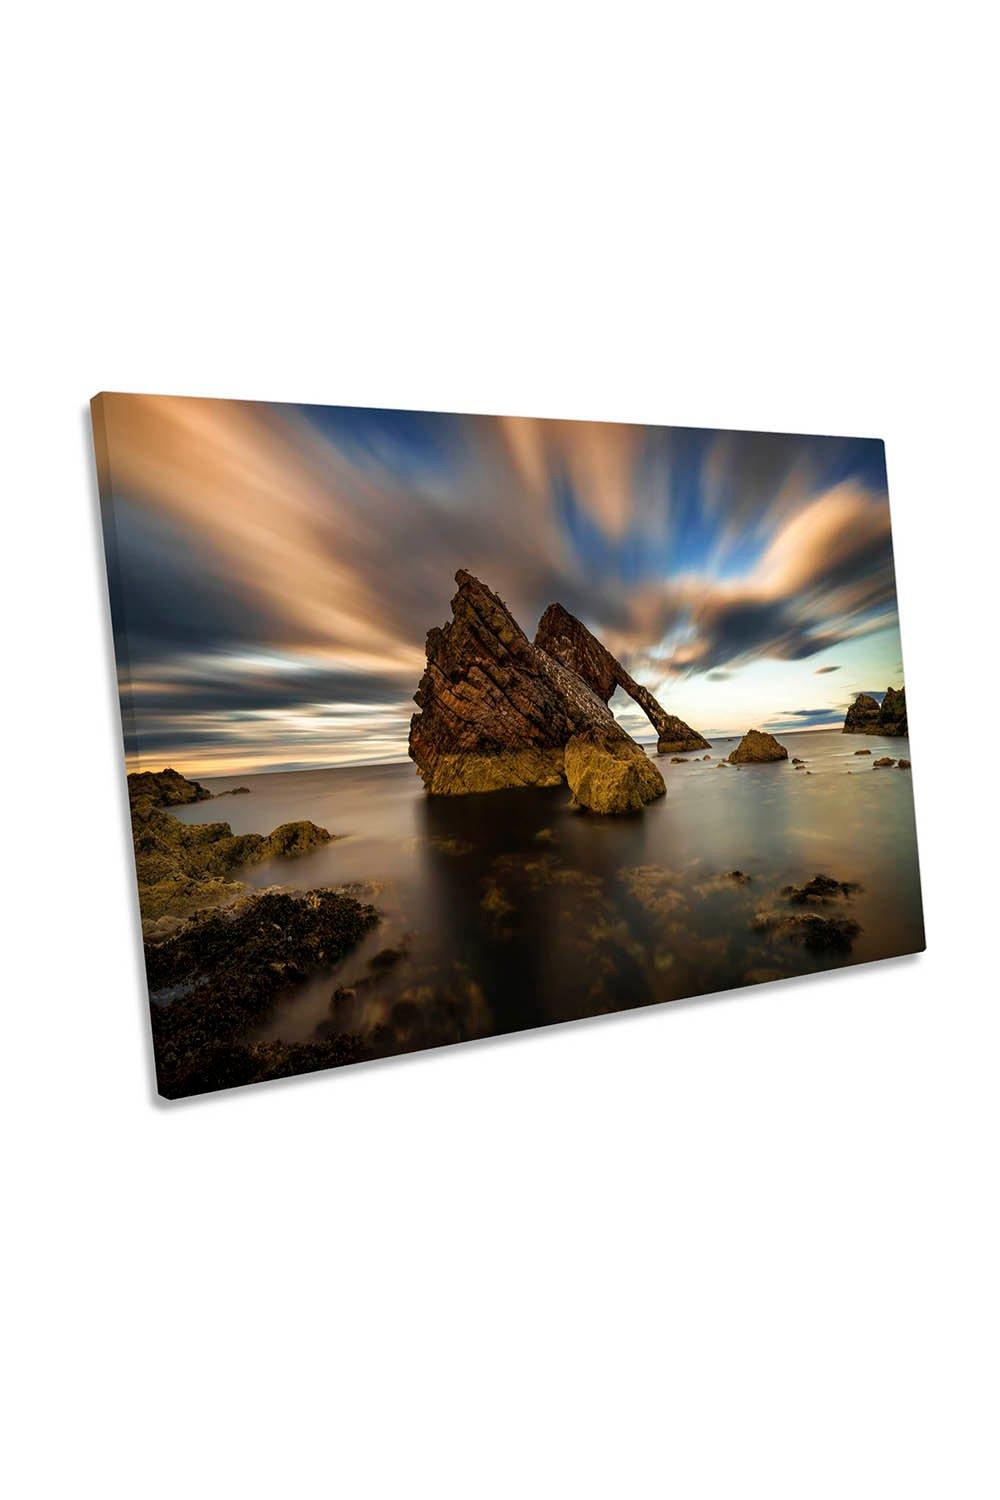 Bow Fiddle Rock Portknockie Scotland Canvas Wall Art Picture Print